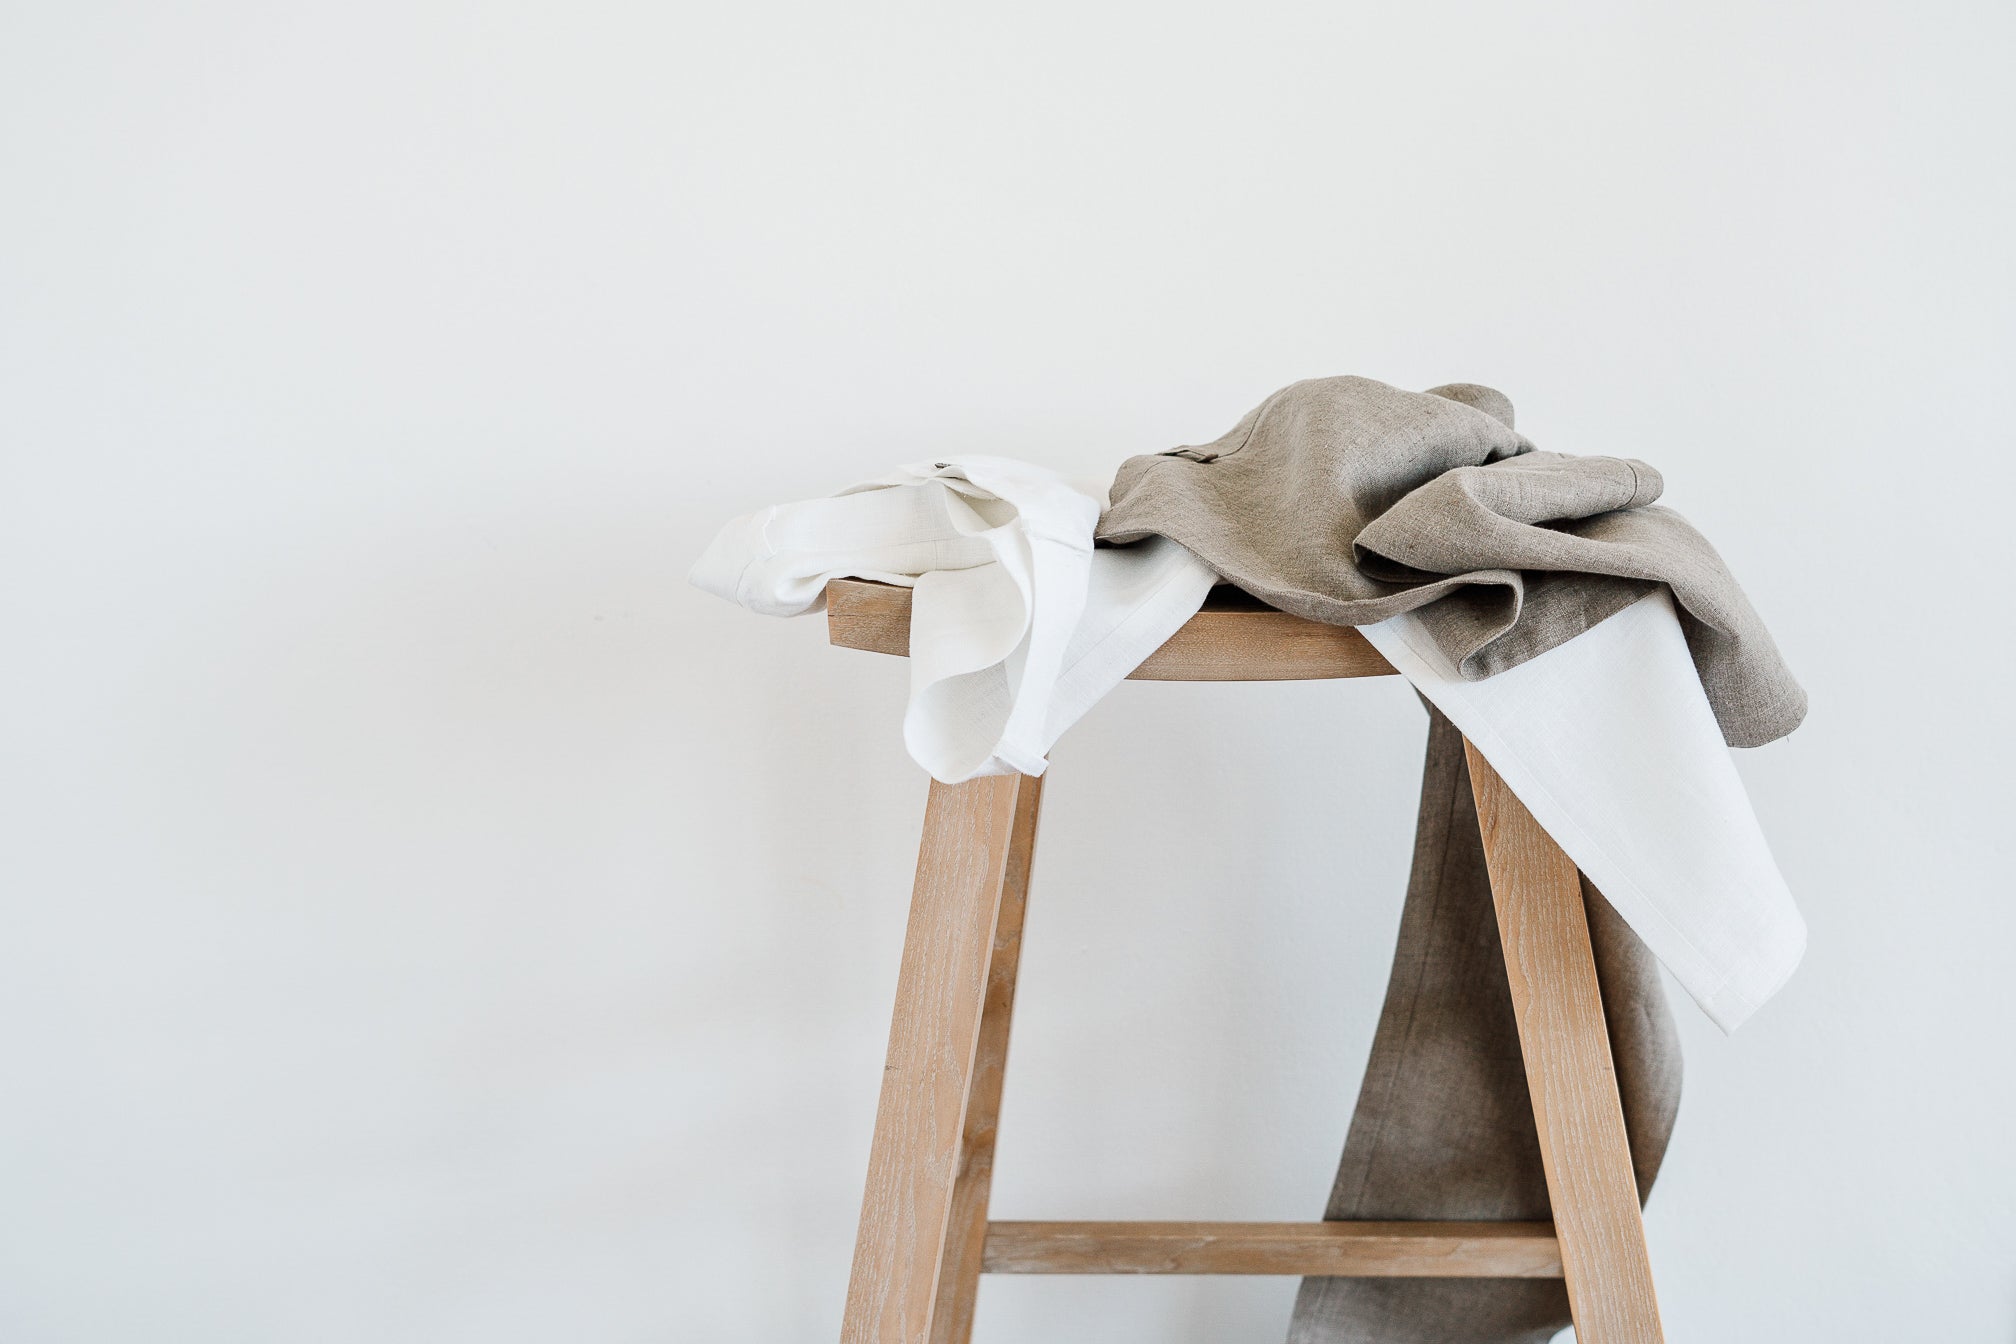 linen pants on wood stool against white a wall